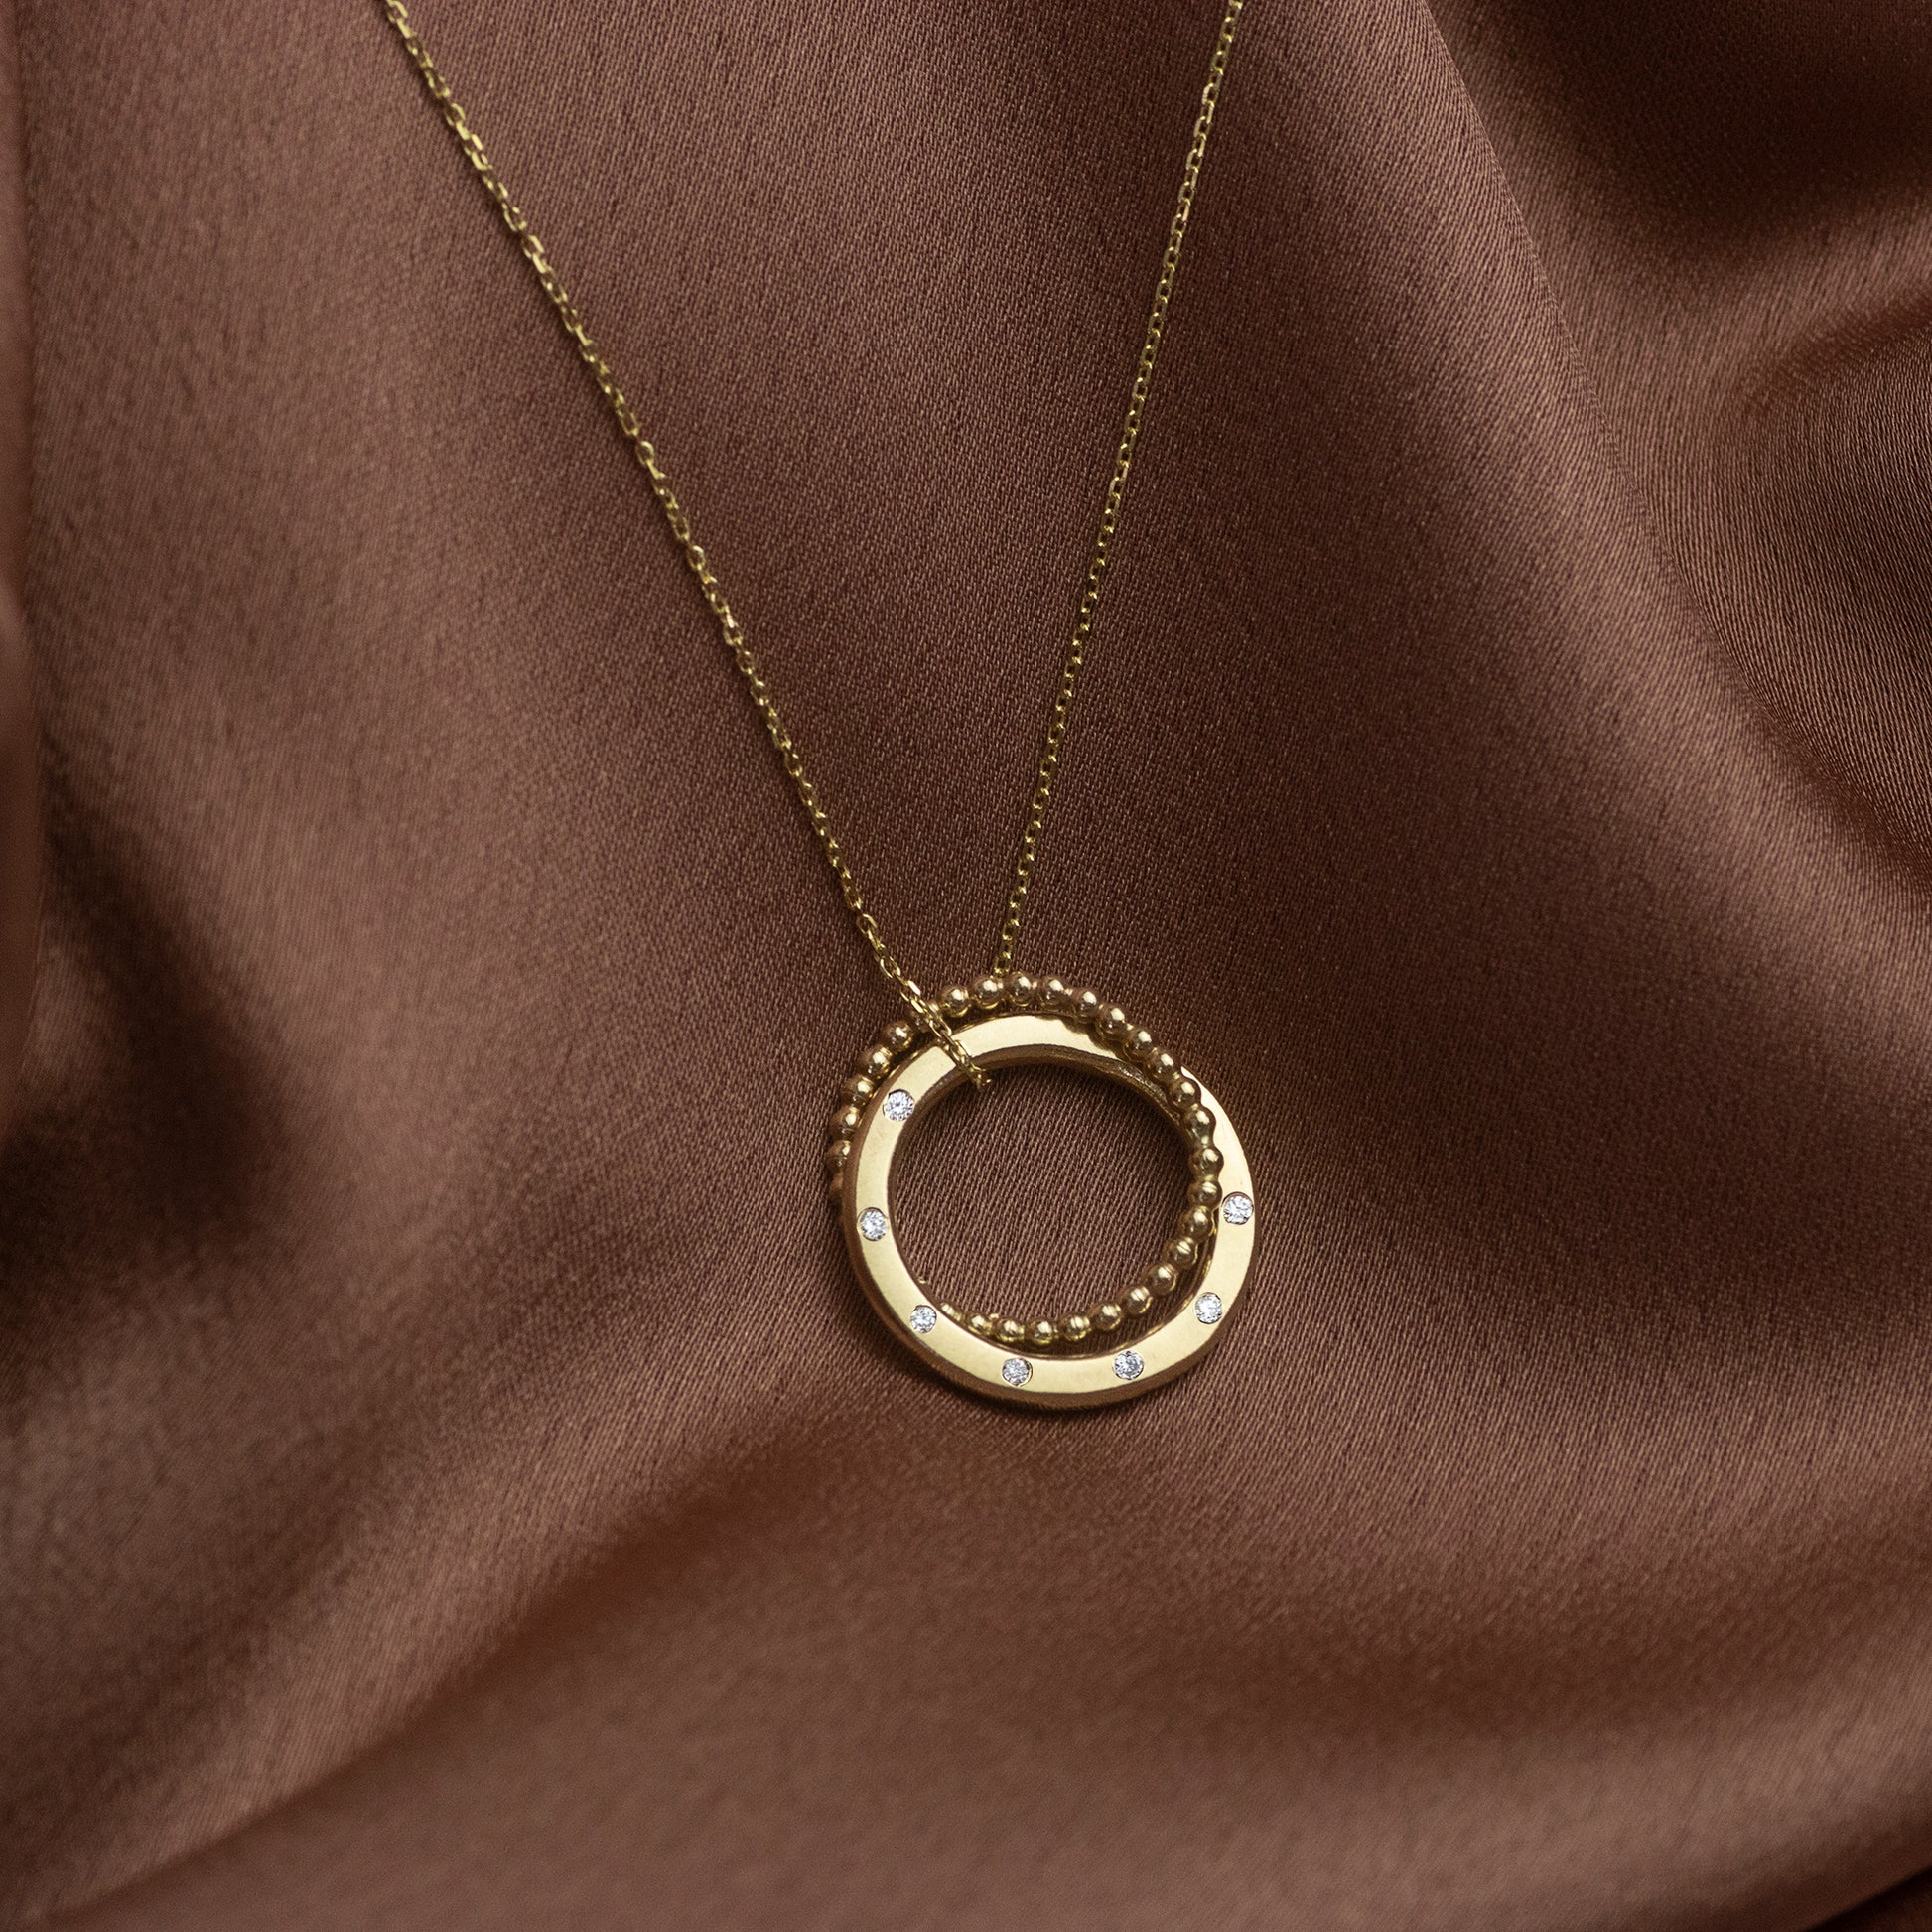 7th Anniversary Necklace - 7 Diamonds for 7 Years - 9kt Gold